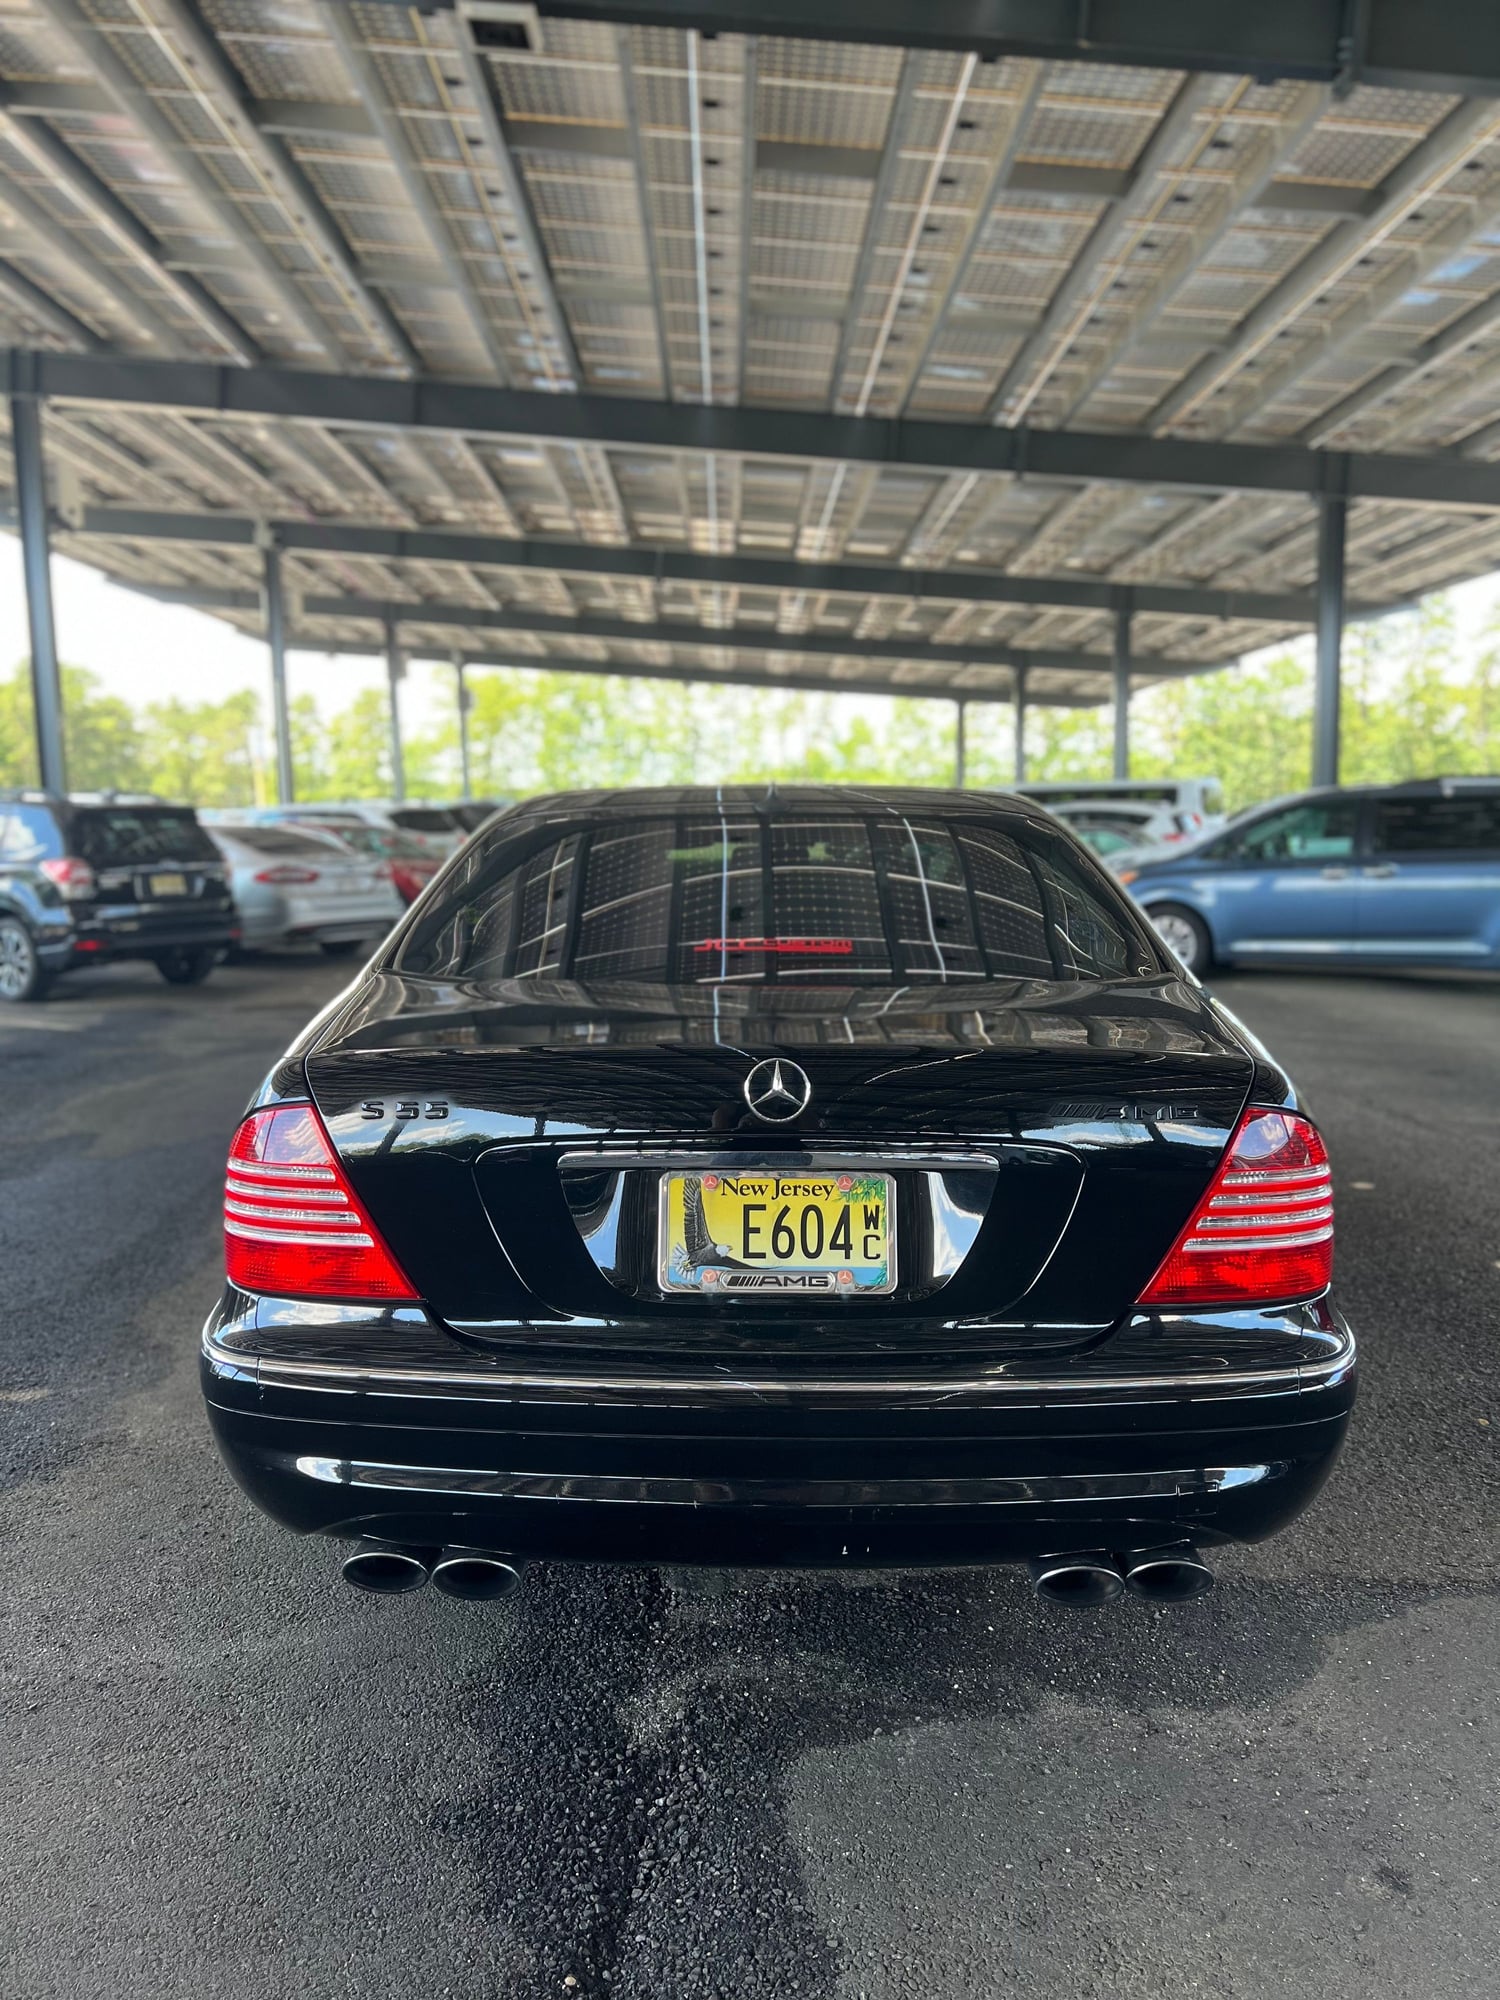 2003 Mercedes-Benz S55 AMG - 2003 S55 AMG - Used - VIN WDBNG74JX3A348074 - 79,800 Miles - 8 cyl - 2WD - Automatic - Sedan - Black - Howell, NJ 07731, United States